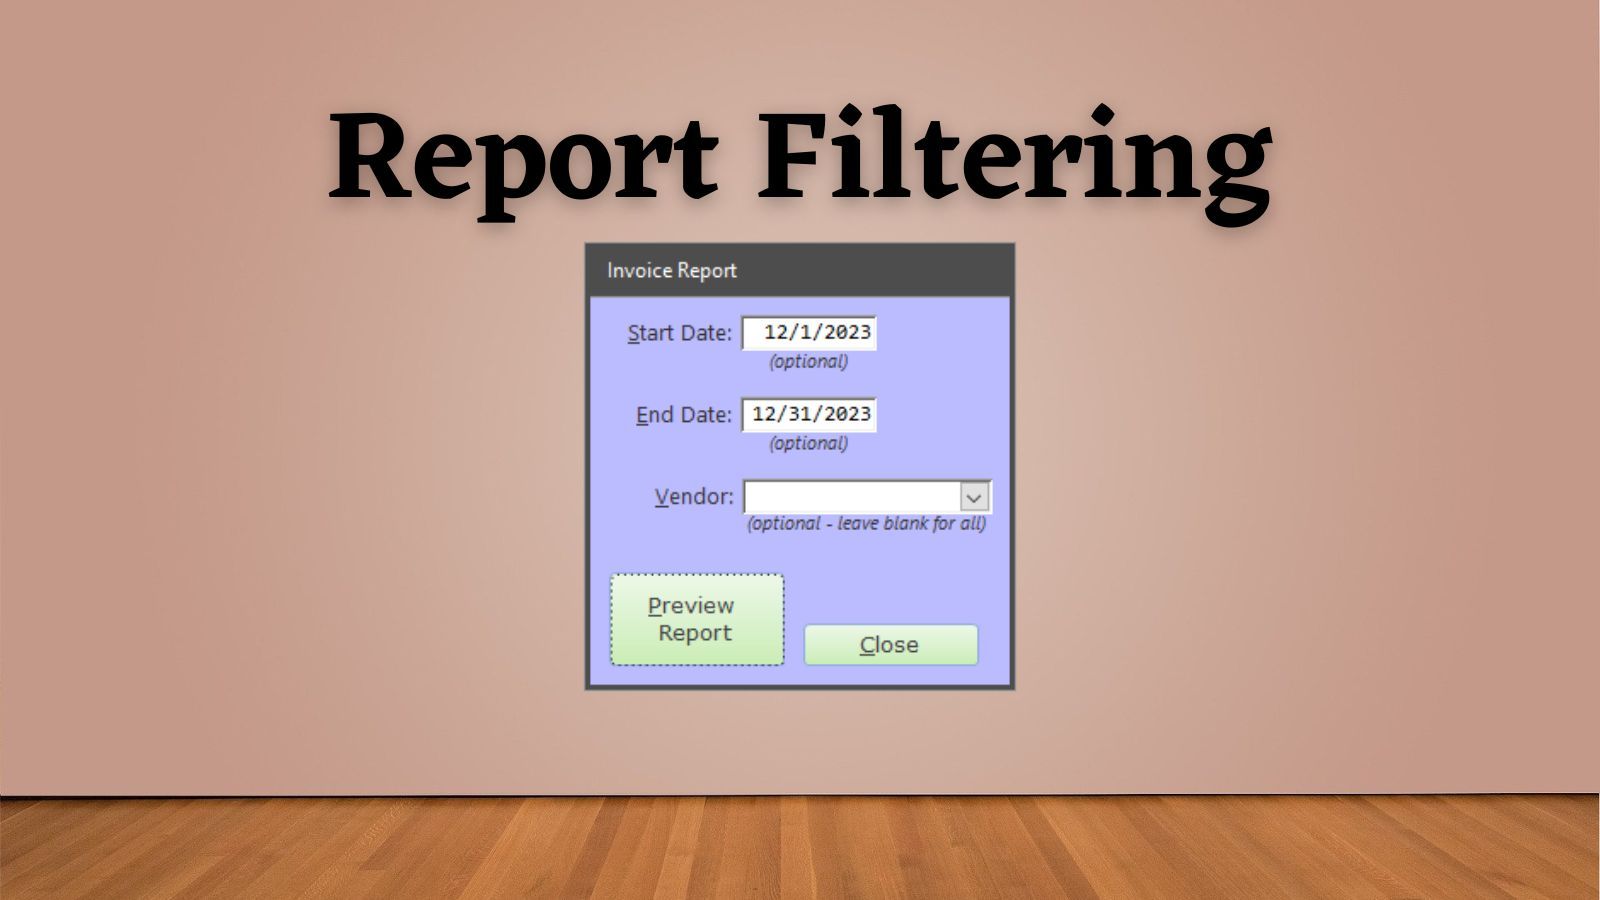 How to Filter Reports in Microsoft Access